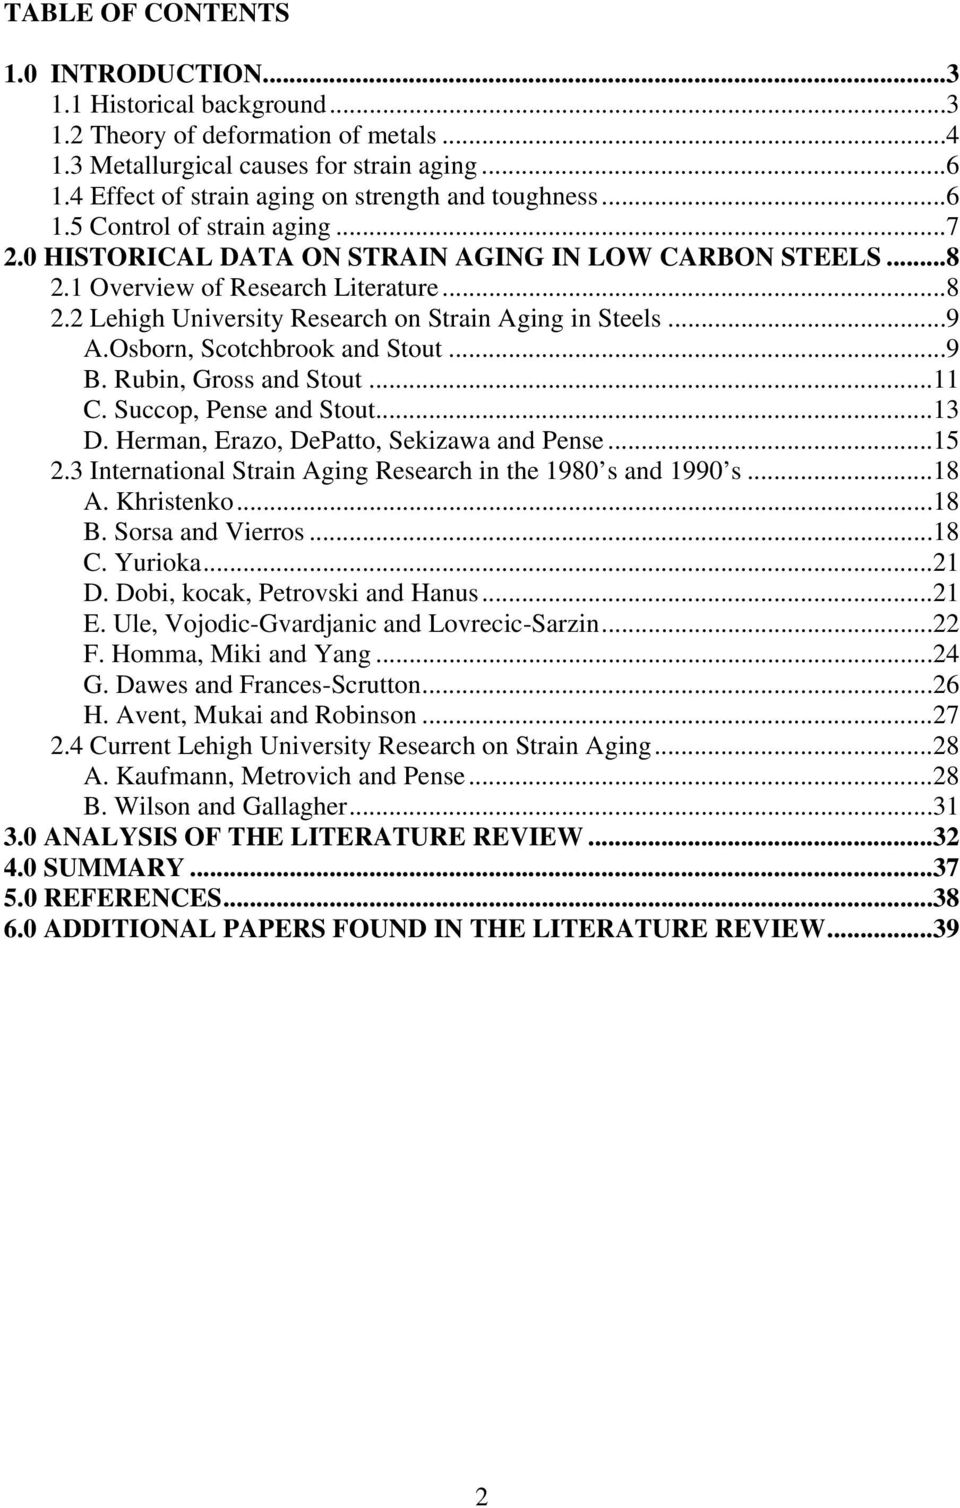 1 Overview of Research Literature...8 2.2 Lehigh University Research on Strain Aging in Steels...9 A.Osborn, Scotchbrook and Stout...9 B. Rubin, Gross and Stout...11 C. Succop, Pense and Stout...13 D.